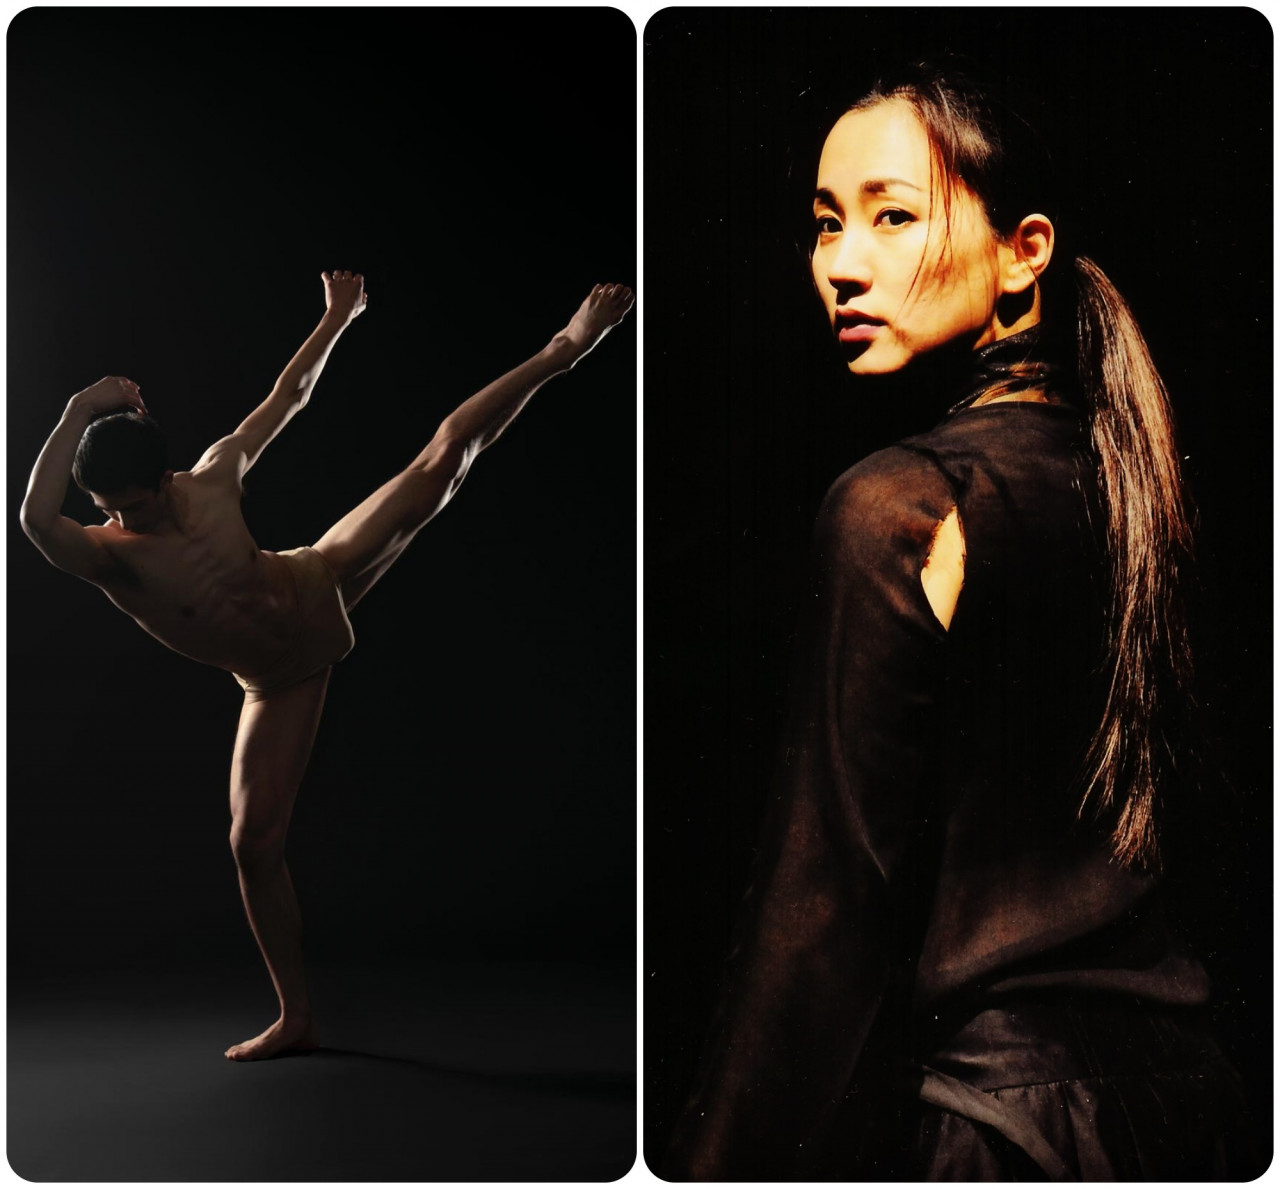 (Left) Jesse Obremski presents ‘No Words’ stemming from the activism on gun control in America. The native New Yorker had the honour to perform for the Obama family at the inaugural White House Dance Series as well as for the Olympic-recognised Fina World Tournament 2019 in South Korea. (Right) Son Yu Joung is an accomplished professional dancer and choreographer in Classical Korean and Contemporary Dance. As a guest choreographer, ‘Barem’ was a piece produced after being invited by the NanYang Academy of Fine Arts (Nafa), Singapore. – Pic courtesy of Nir Arieli & Kim Hyun Chul